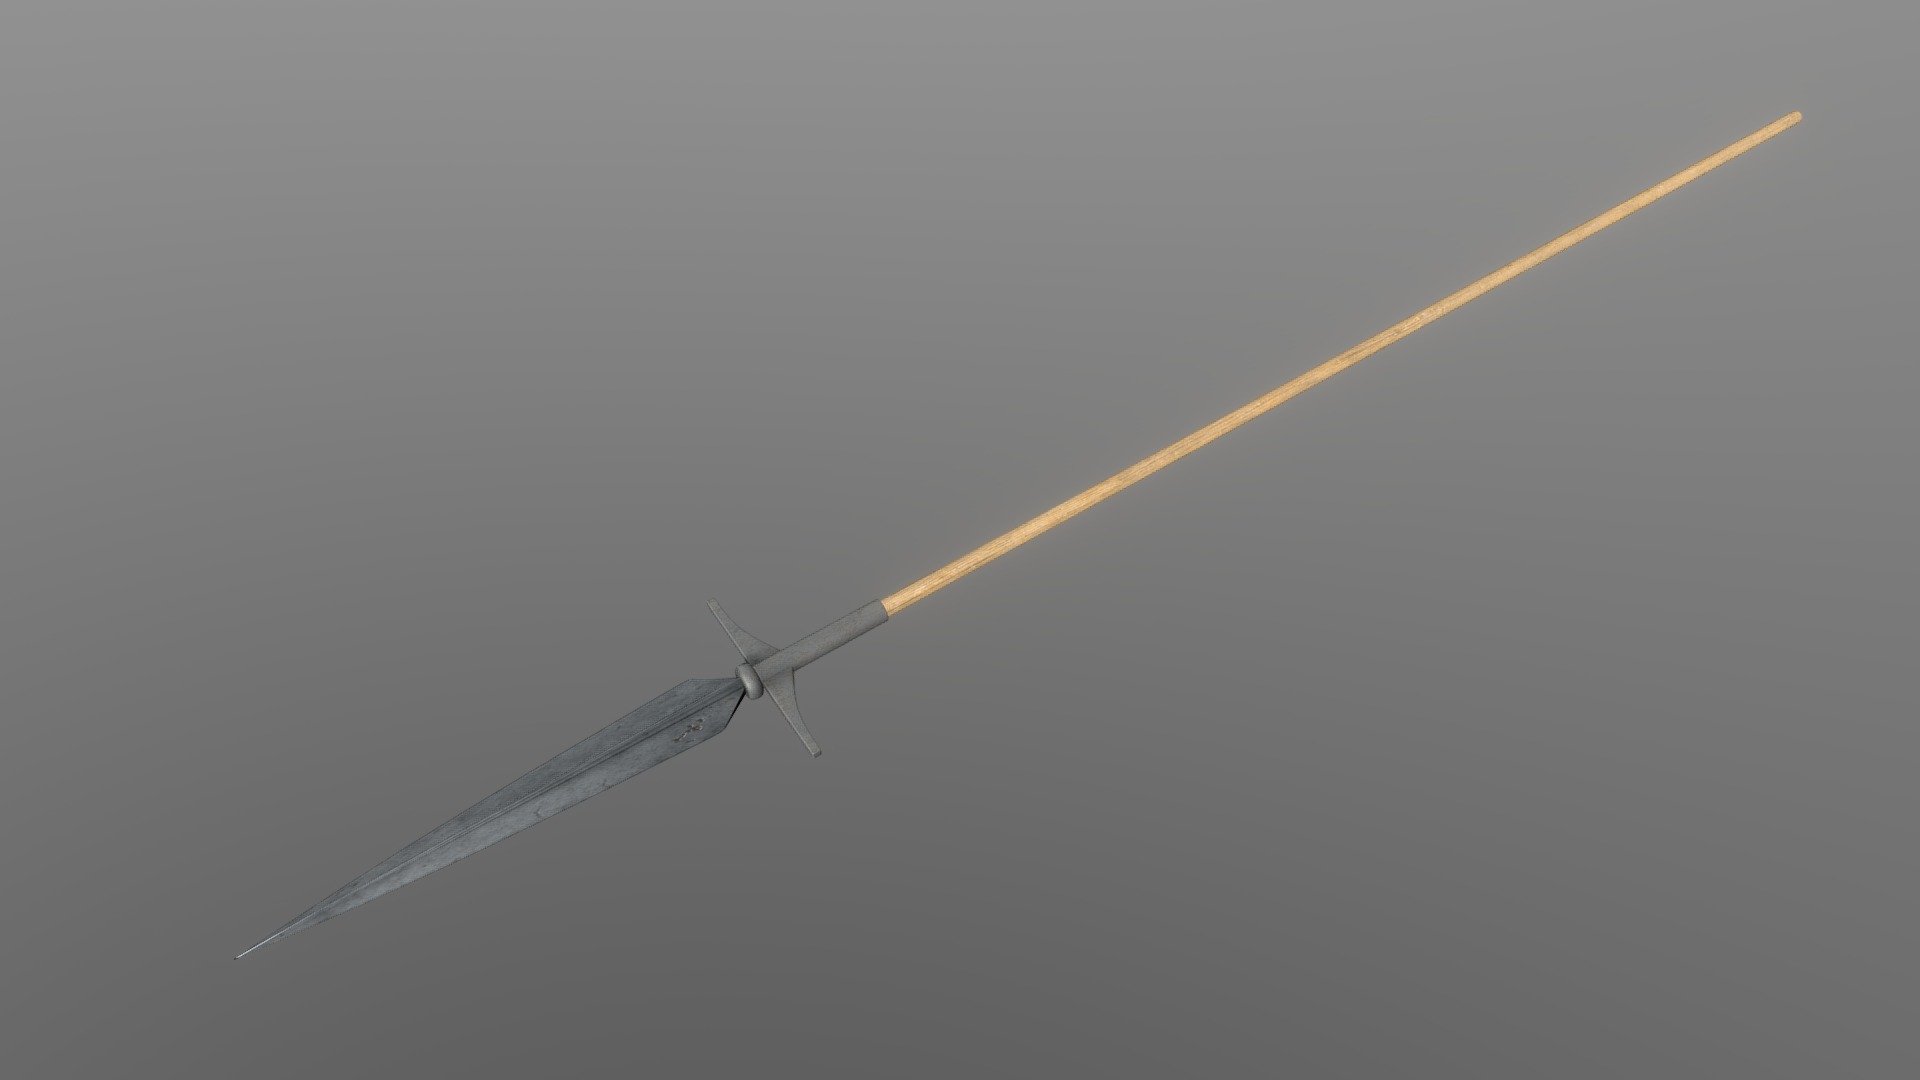 Boar Spear B
Bring your project to life with this low poly 3D model of an Boar Spear. Perfect for use in games, animations, VR, AR, and more, this model is optimized for performance and still retains a high level of detail.


Features



Low poly design with 2,532 vertices

4,994 edges

2,468 faces (polygons)

4,936 tris

2k PBR Textures and materials

File formats included: .obj, .fbx, .dae, .stl


Tools Used
This Boar Spear low poly 3D model was created using Blender 3.3.1, a popular and versatile 3D creation software.


Availability
This low poly Boar Spear 3D model is ready for use and available for purchase. Bring your project to the next level with this high-quality and optimized model 3d model